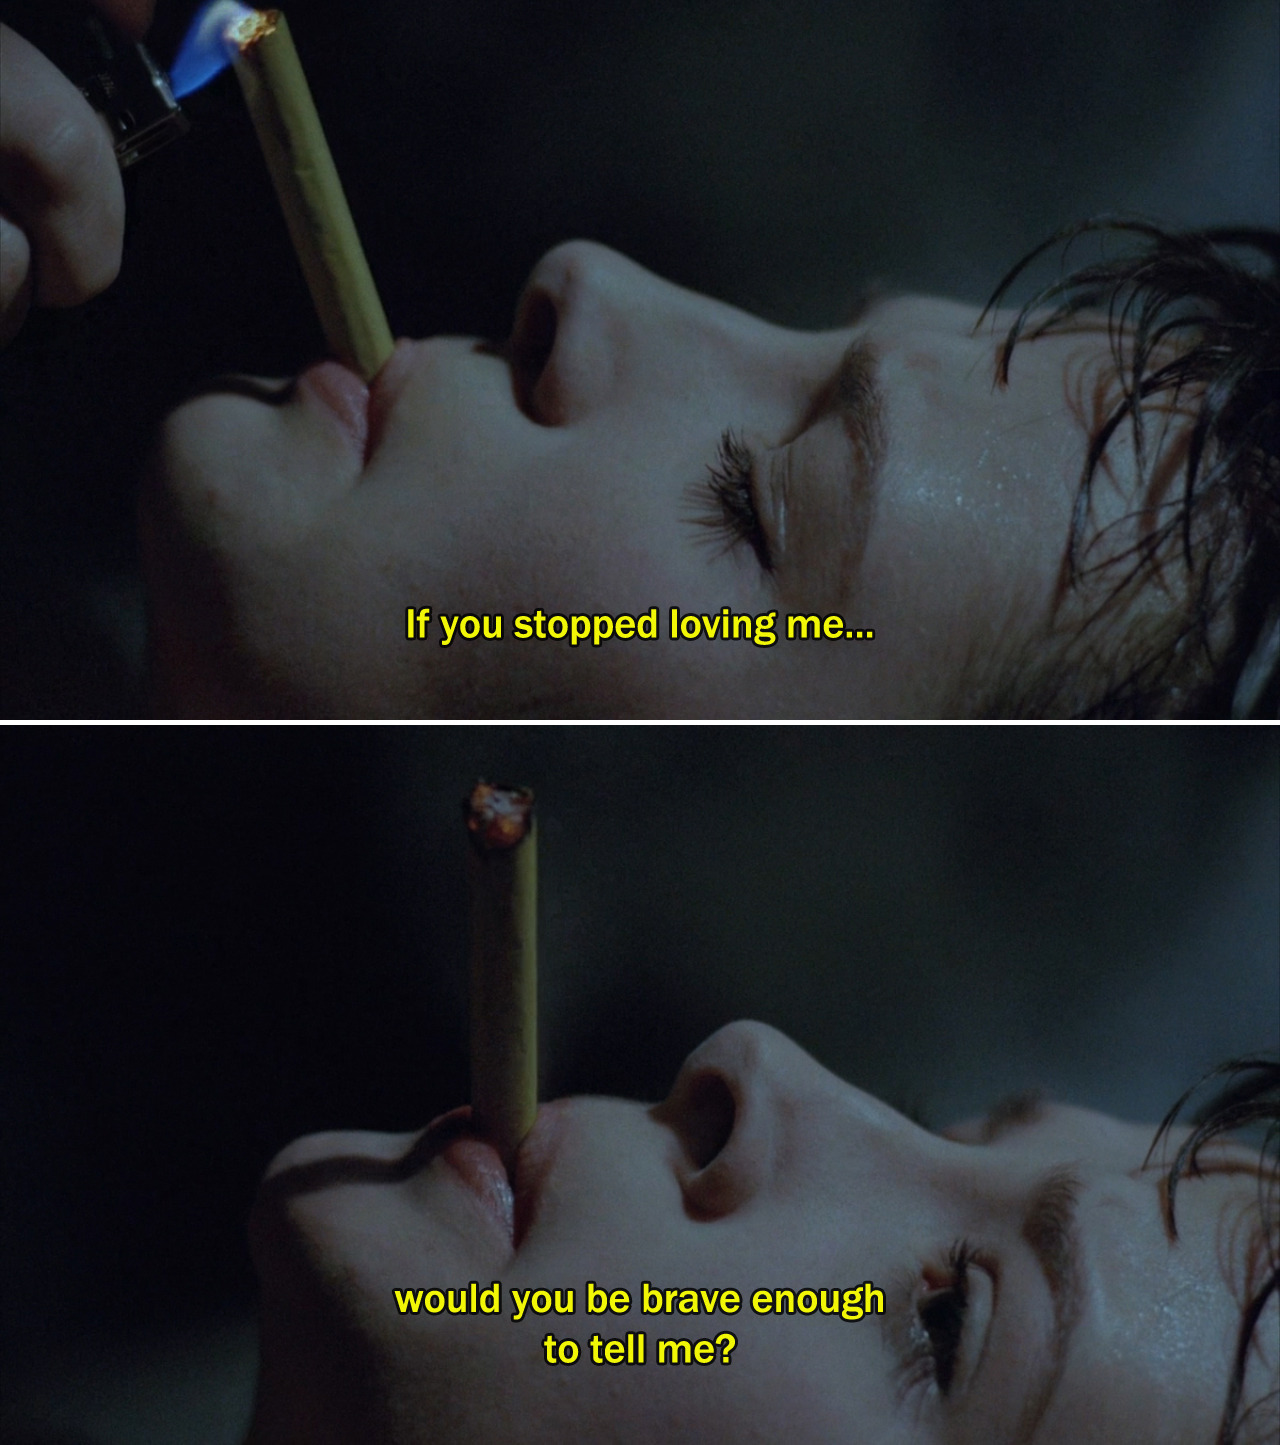 ― Mauvais sang (1986)
Anna: If you stopped loving me…would you be brave enough to tell me?